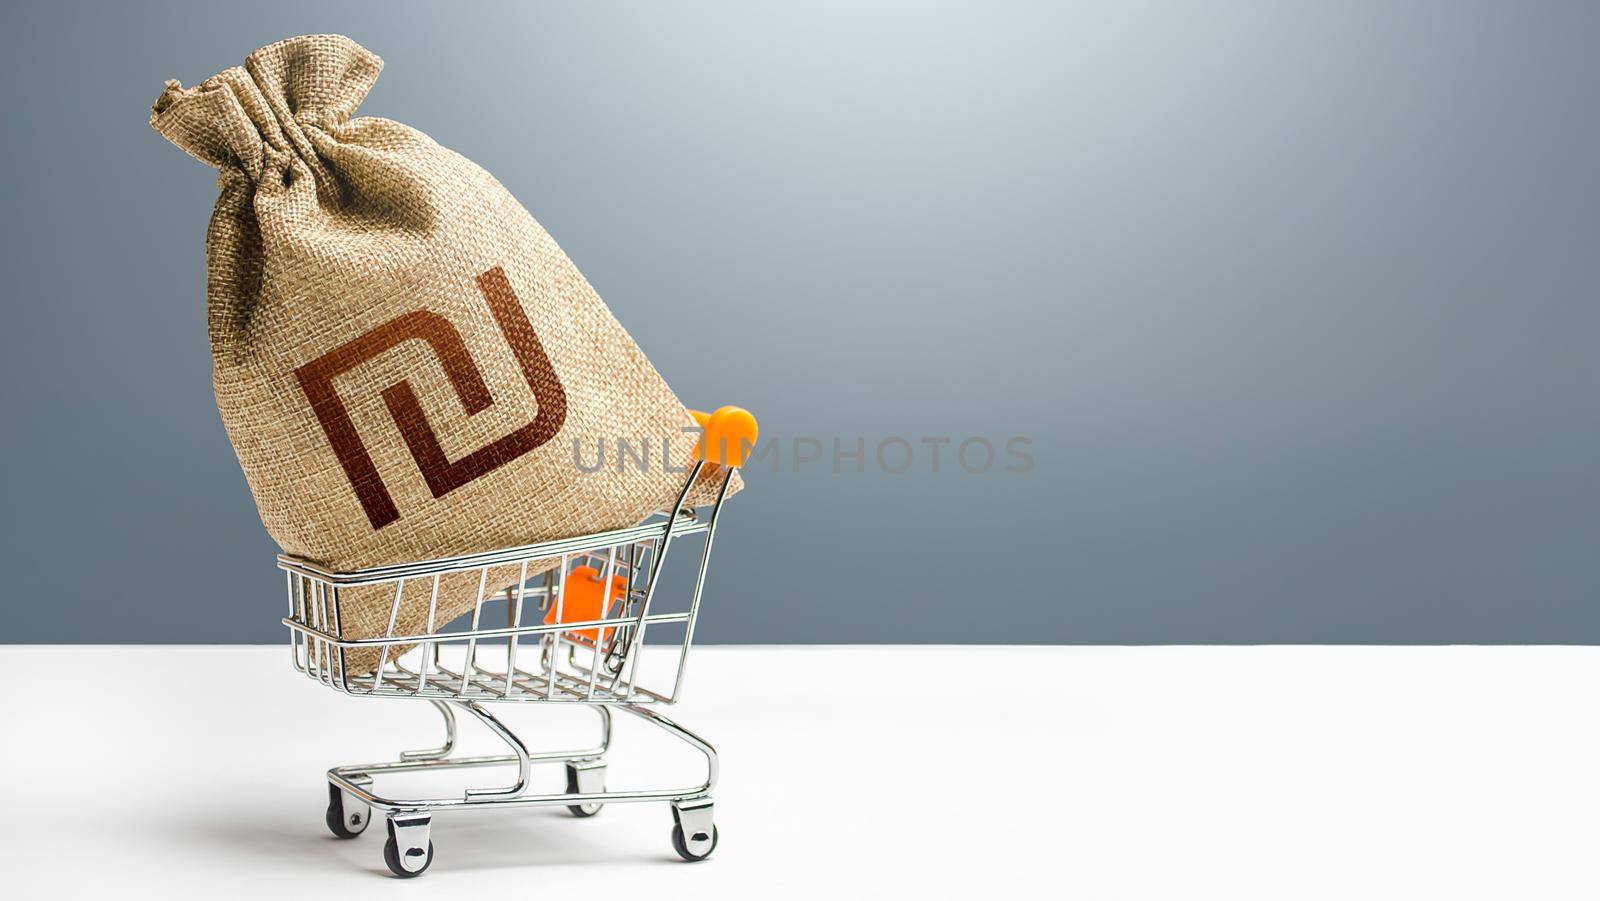 Israeli shekel money bag in a shopping cart. Public budgeting. Profits and super profits. Business and trade concept. Minimum living wage. Loans, microloans. Consumer basket. Economic bubbles.